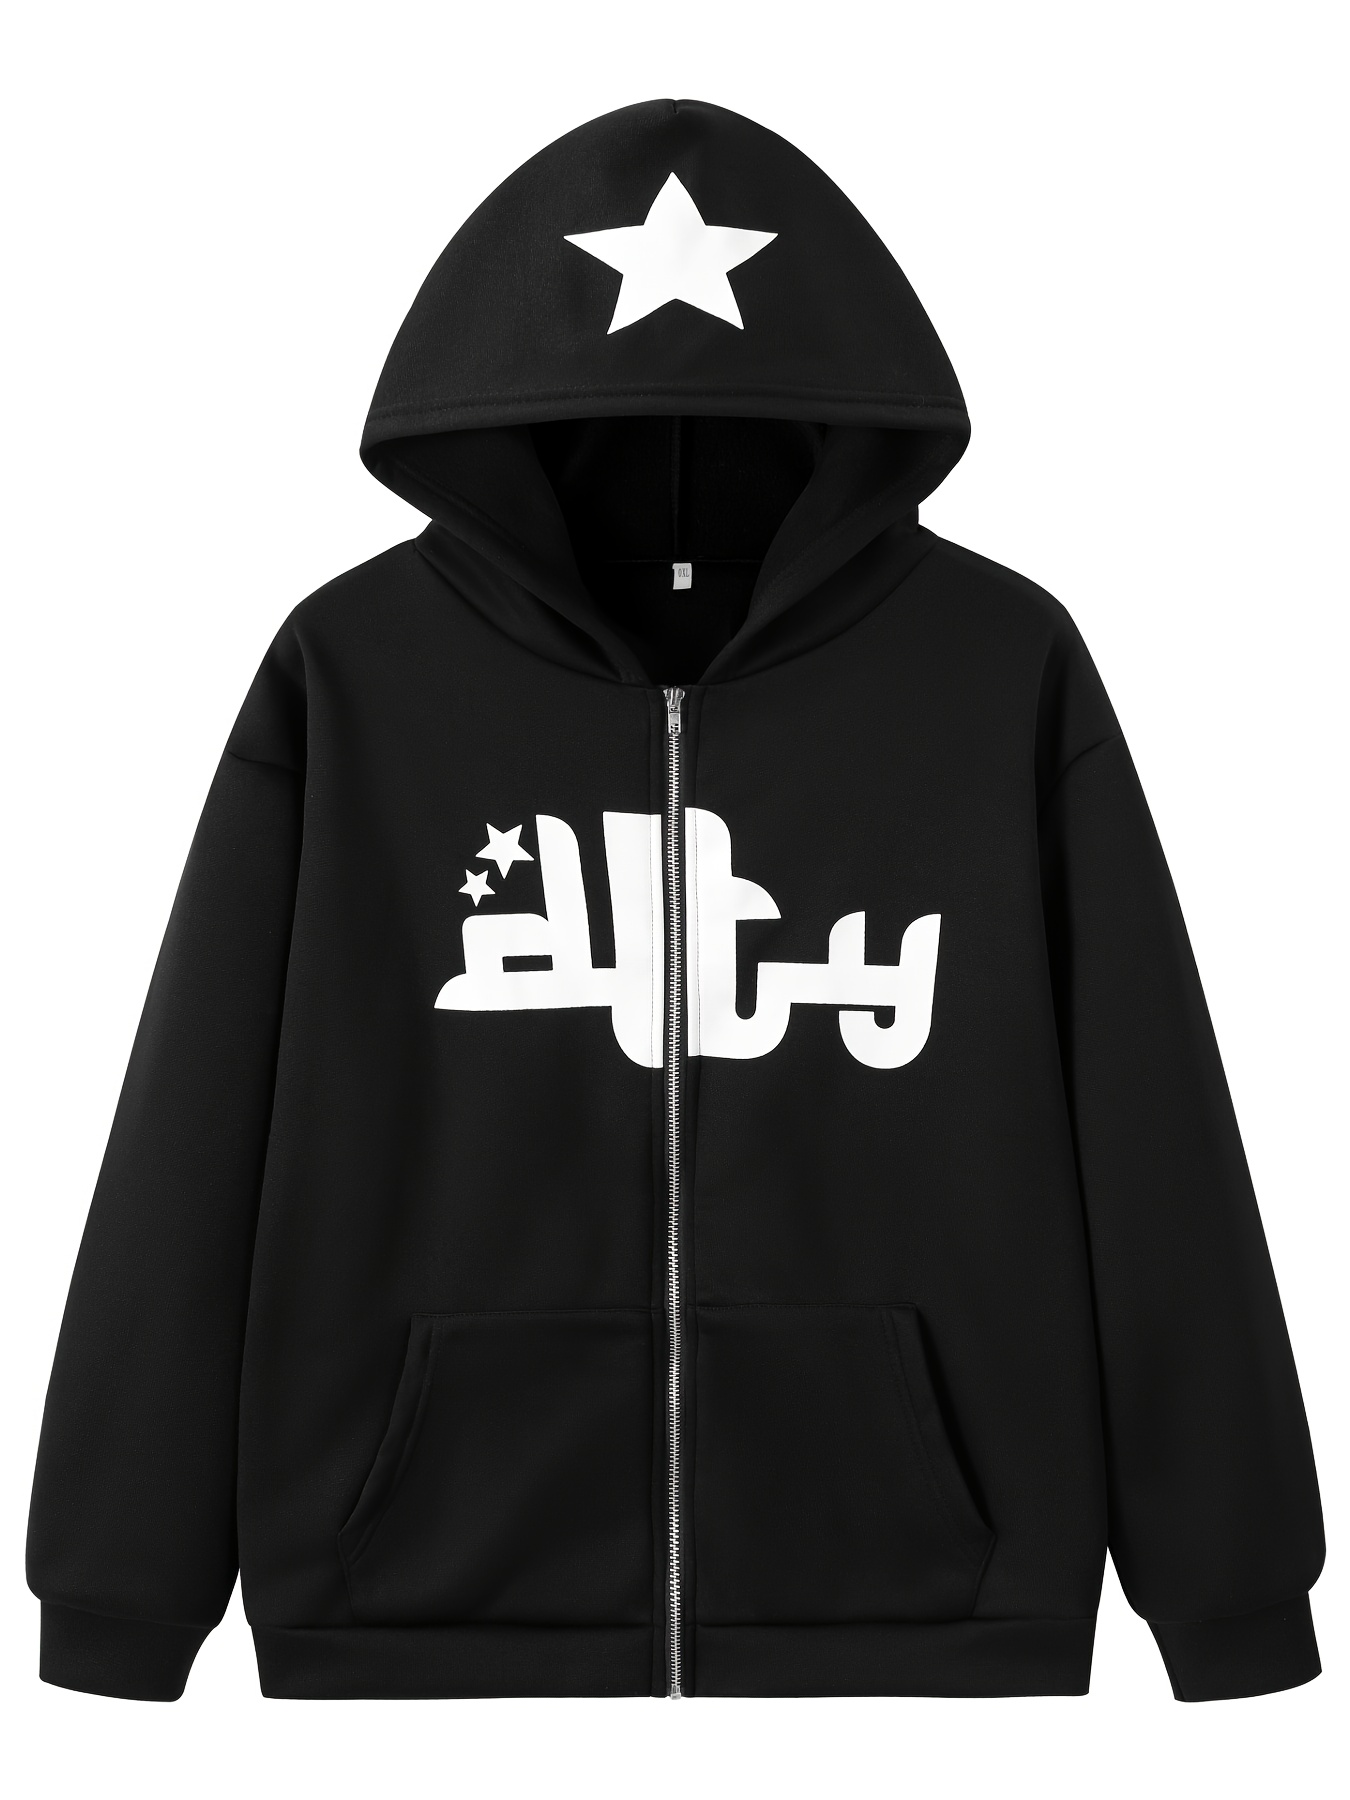 Plus Size Sports Top, Women's Plus Star Graphic Long Sleeve Zip Up Fleece  Lined Punk Hoodie With Pockets